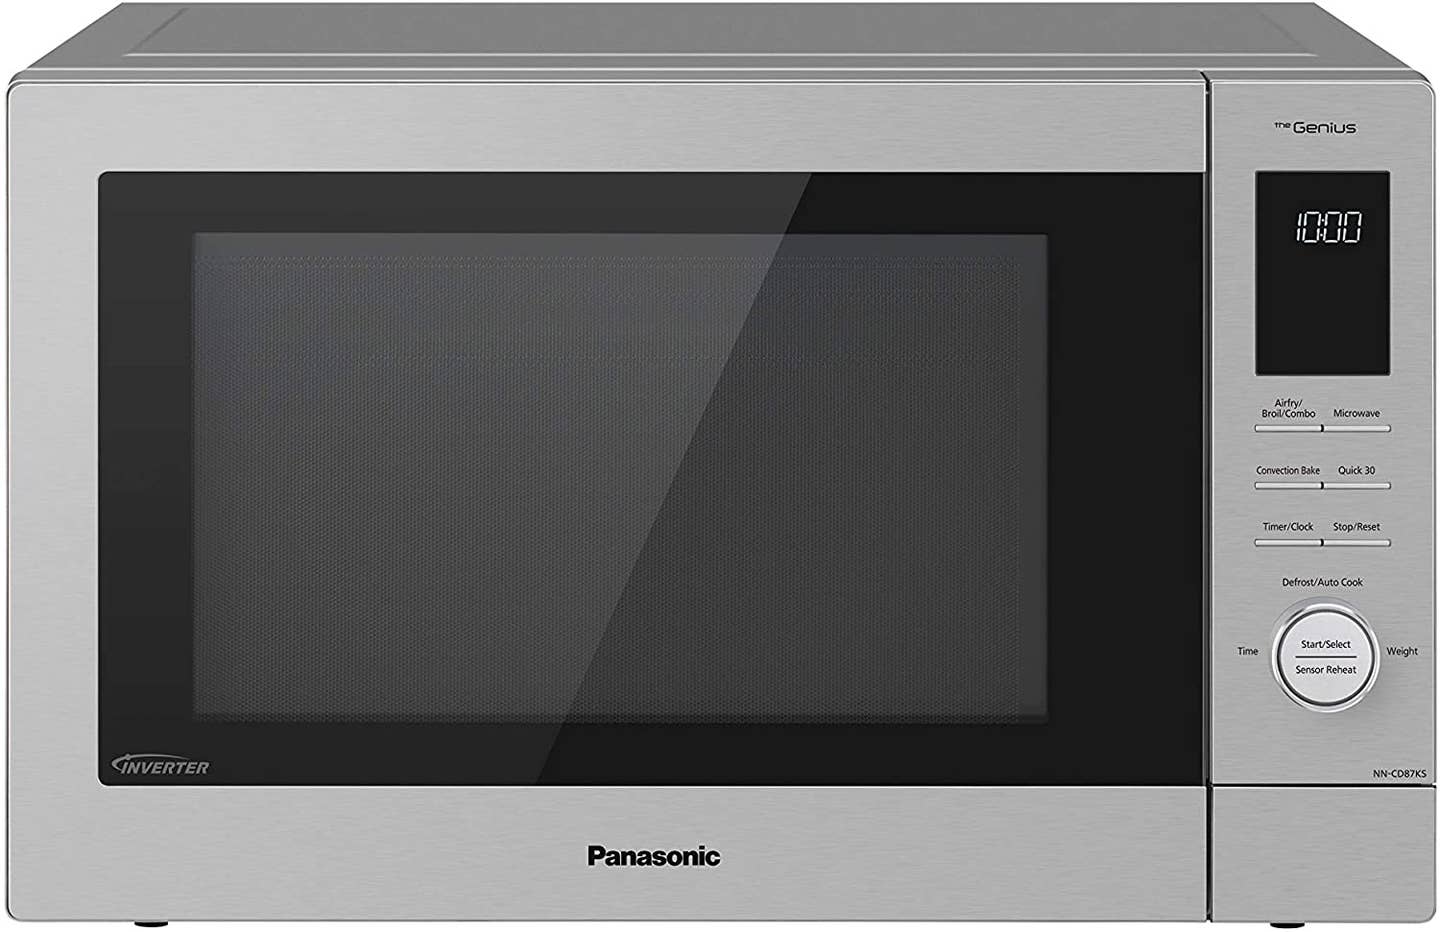 Panasonic Home Chef 4-in-1 Microwave Oven